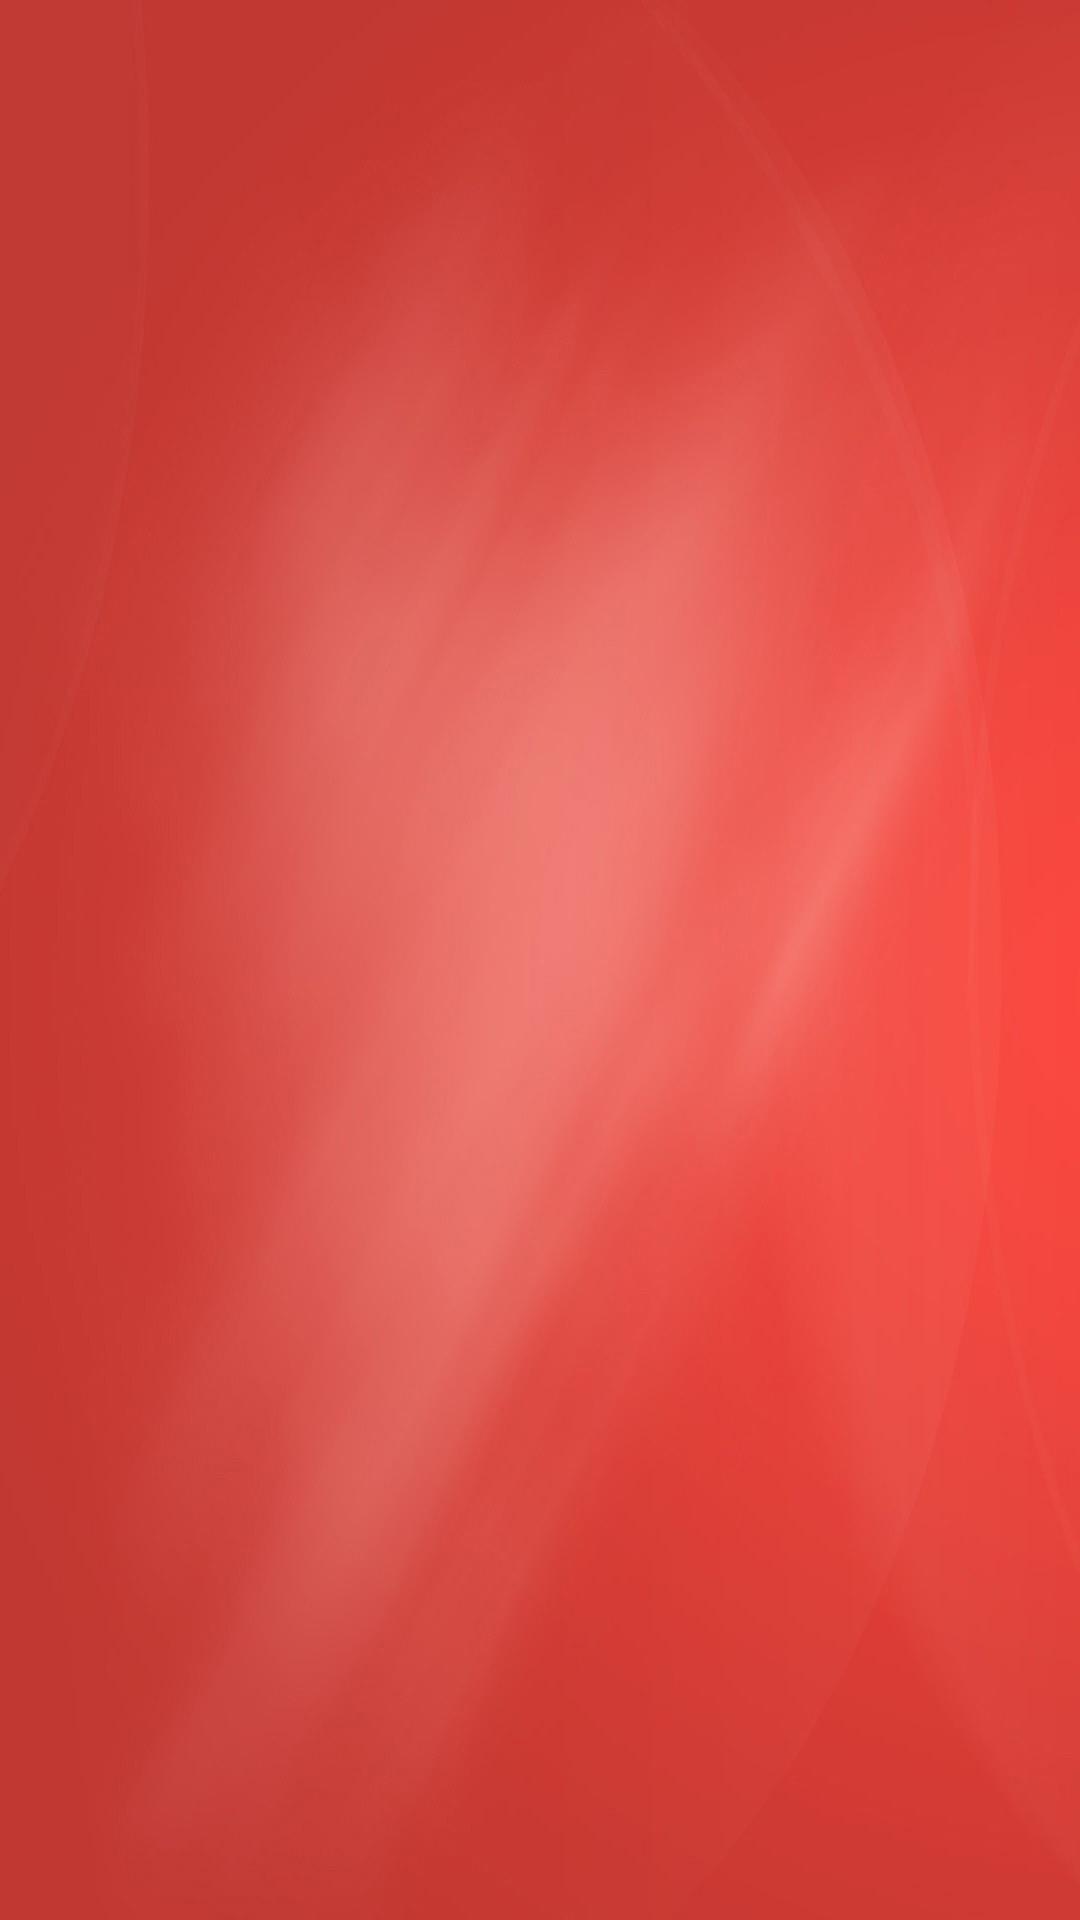 Simple Red Angled Gradient Android Wallpaper free download